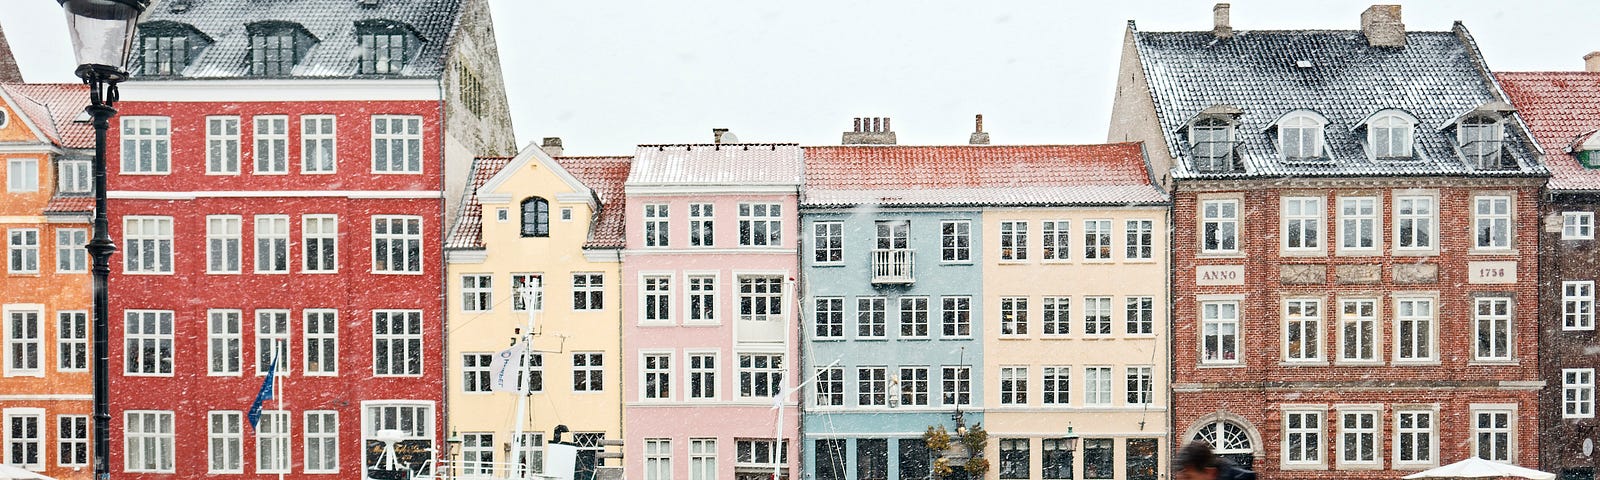 A scene from Copenhagen, showing some houses in Nyhavn from across the canal — a boat is in the canal and a bicyclist passing in front of the camera. It is winter and small amount of snow is coloring the roofs slightly white.